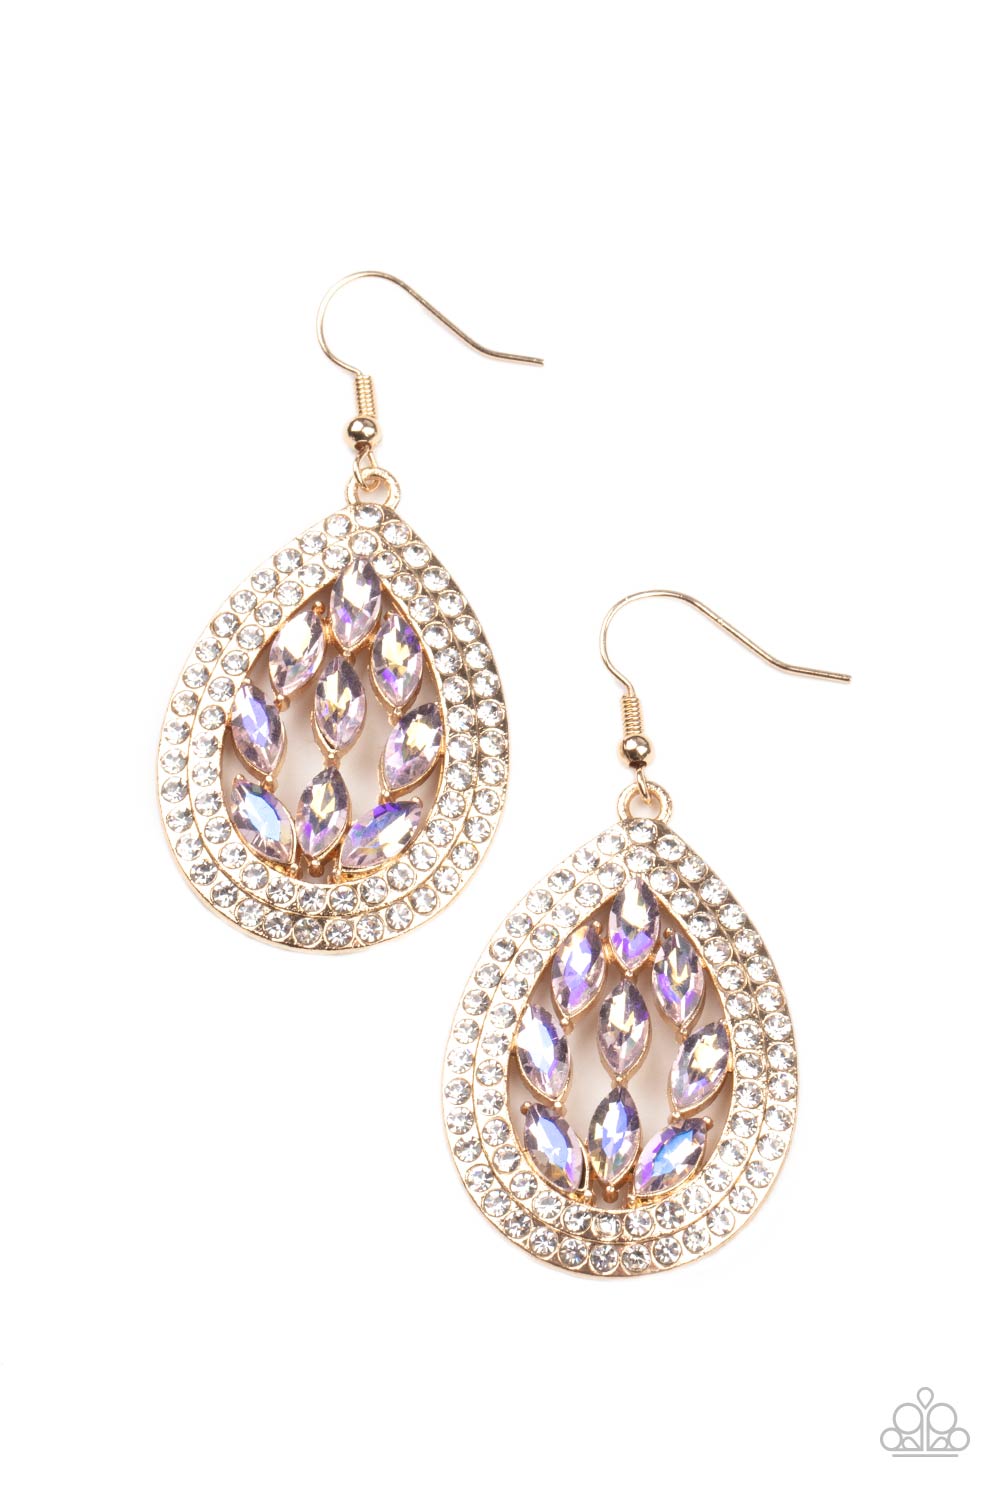 Encased Elegance Gold and Iridescent Rhinestone Earrings - Paparazzi Accessories- lightbox - CarasShop.com - $5 Jewelry by Cara Jewels